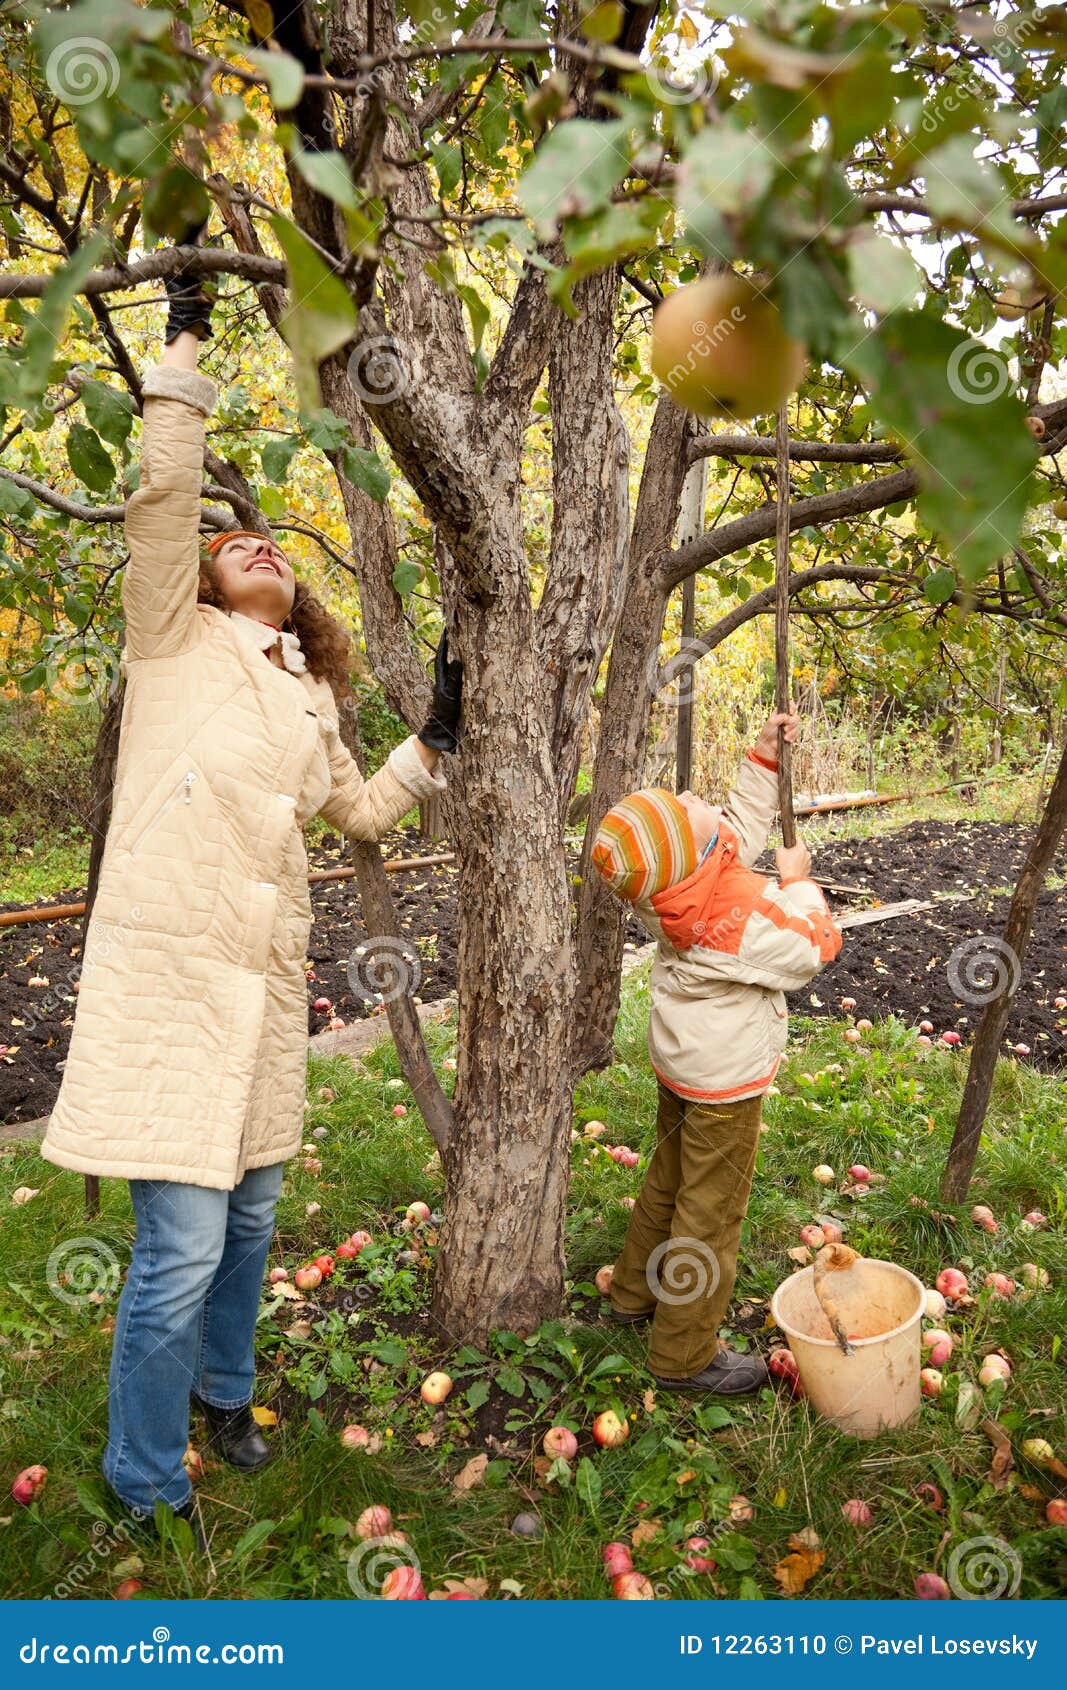 mather and son gather apples in autumnal garden